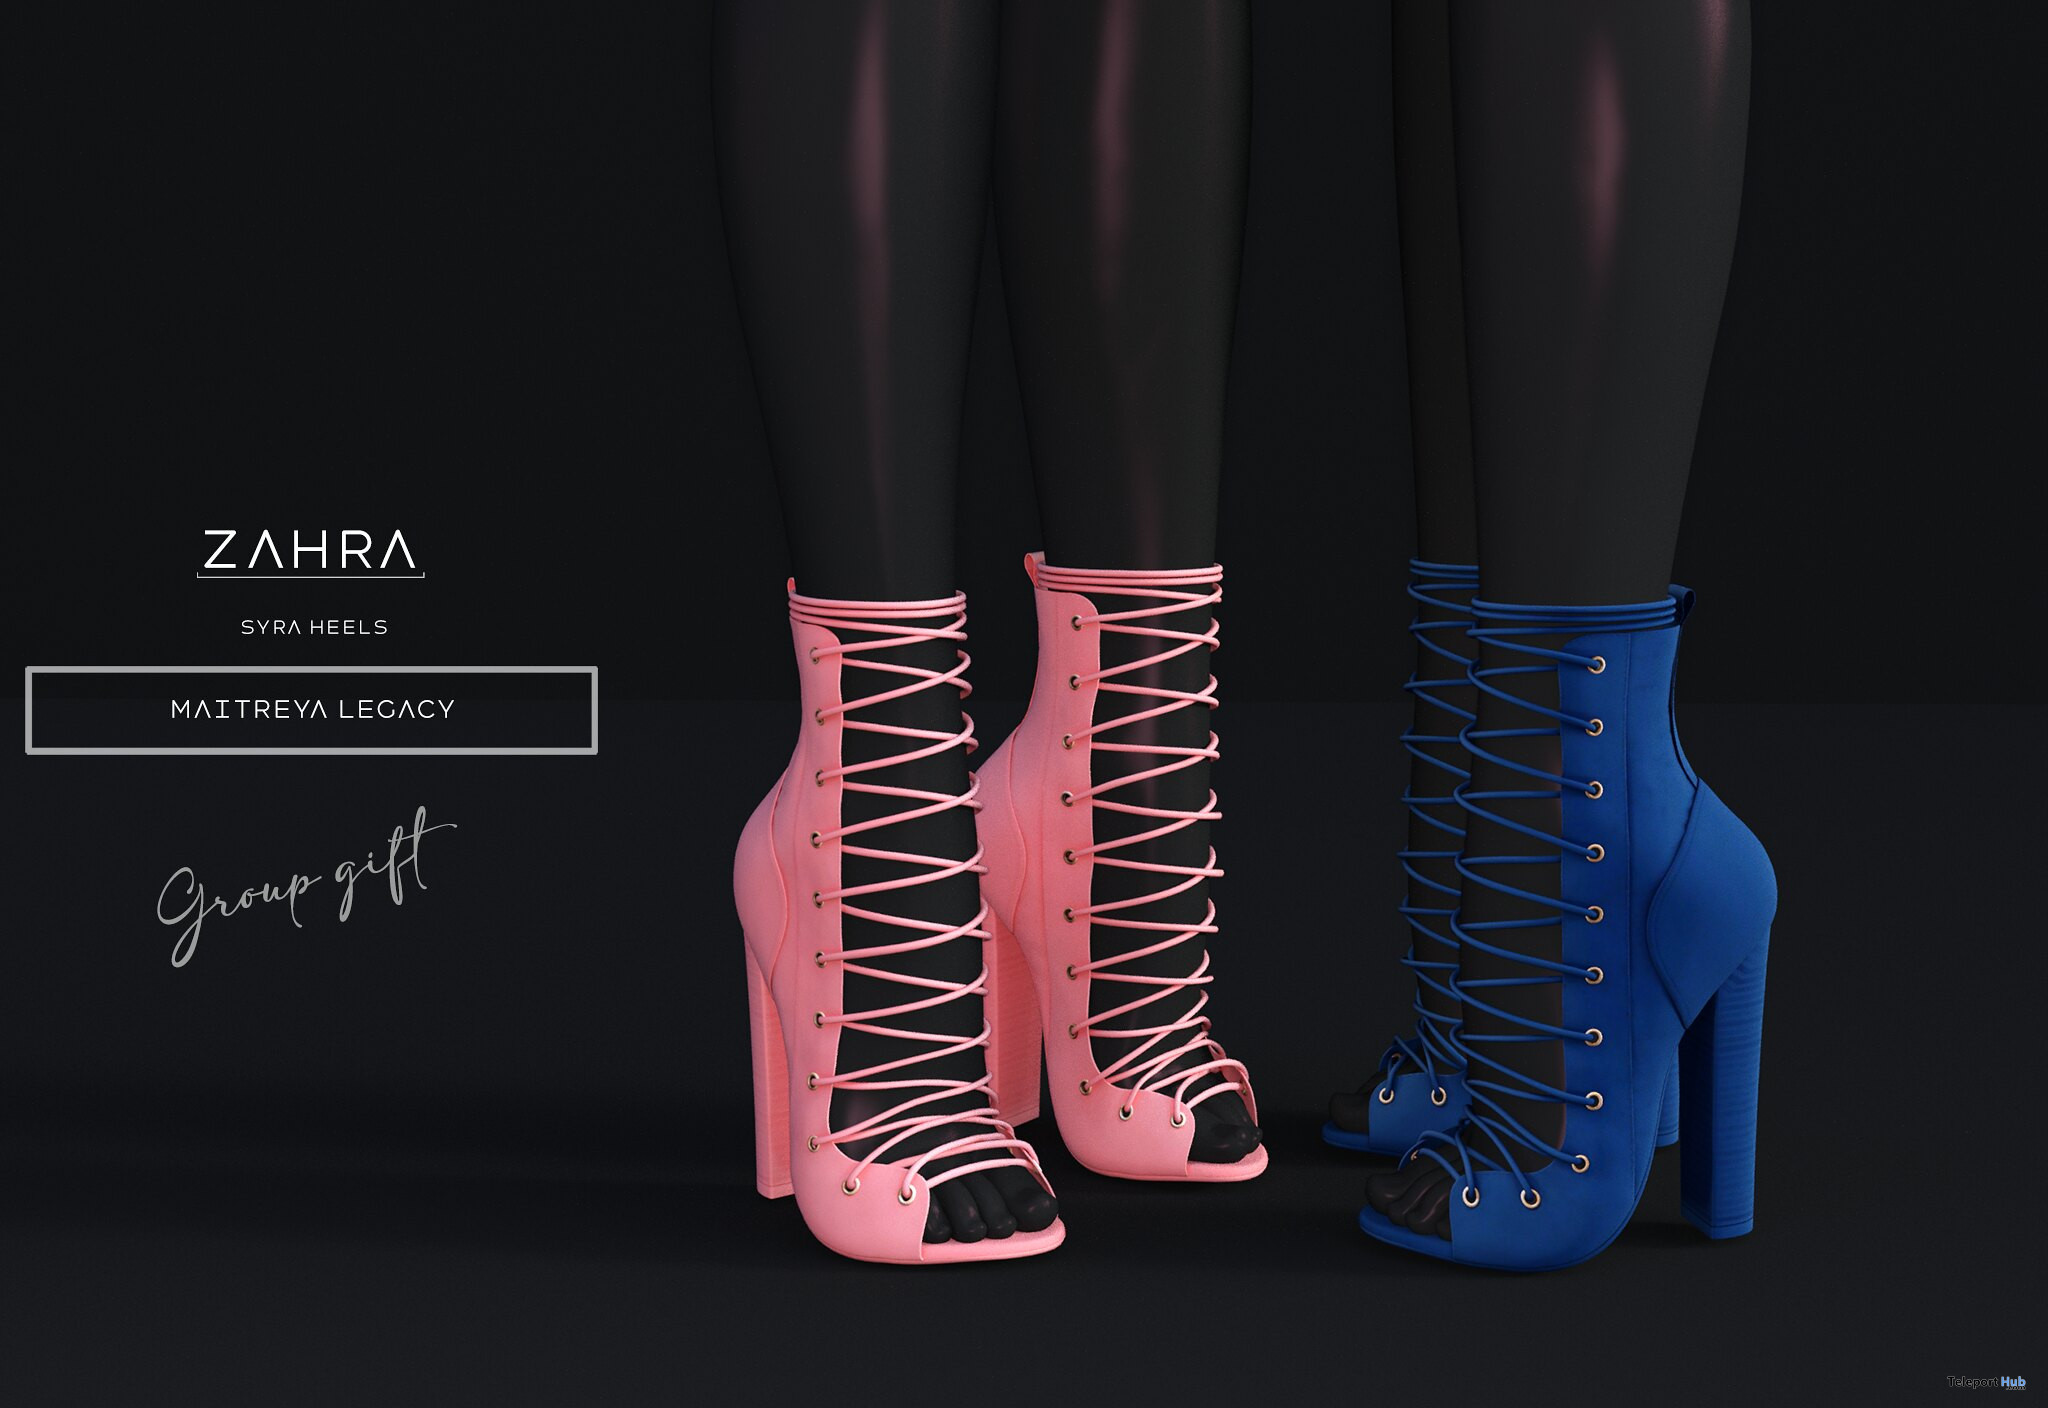 Syra Heels Fatpack October 2021 Group Gift by ZAHRA - Teleport Hub - teleporthub.com